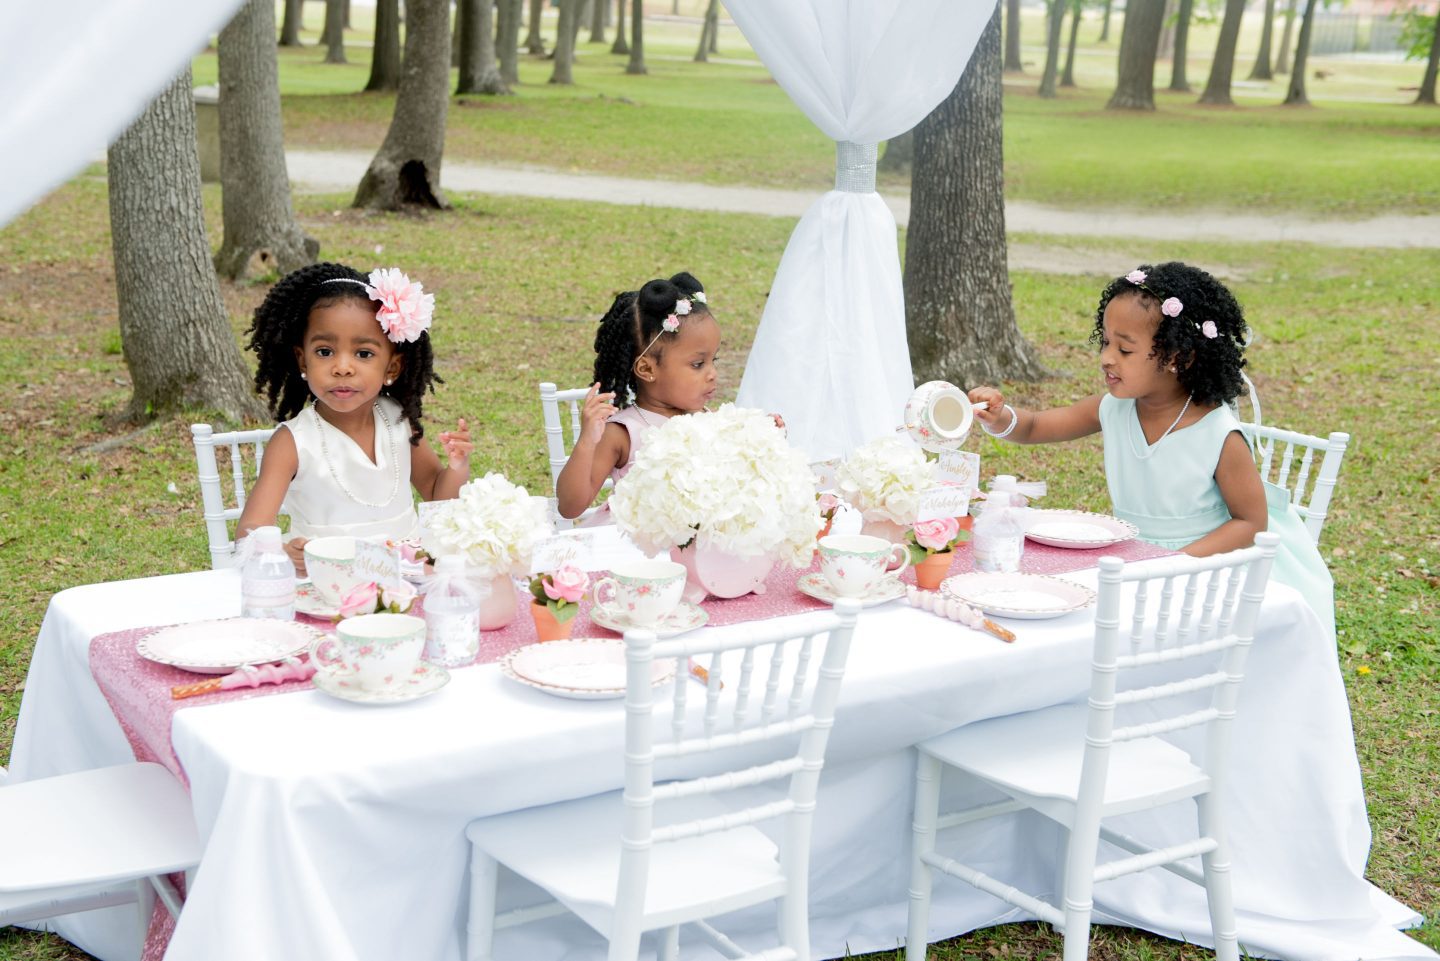 Children’s Tea Party Inspiration – How to Plan a Child’s Party with a Photographer